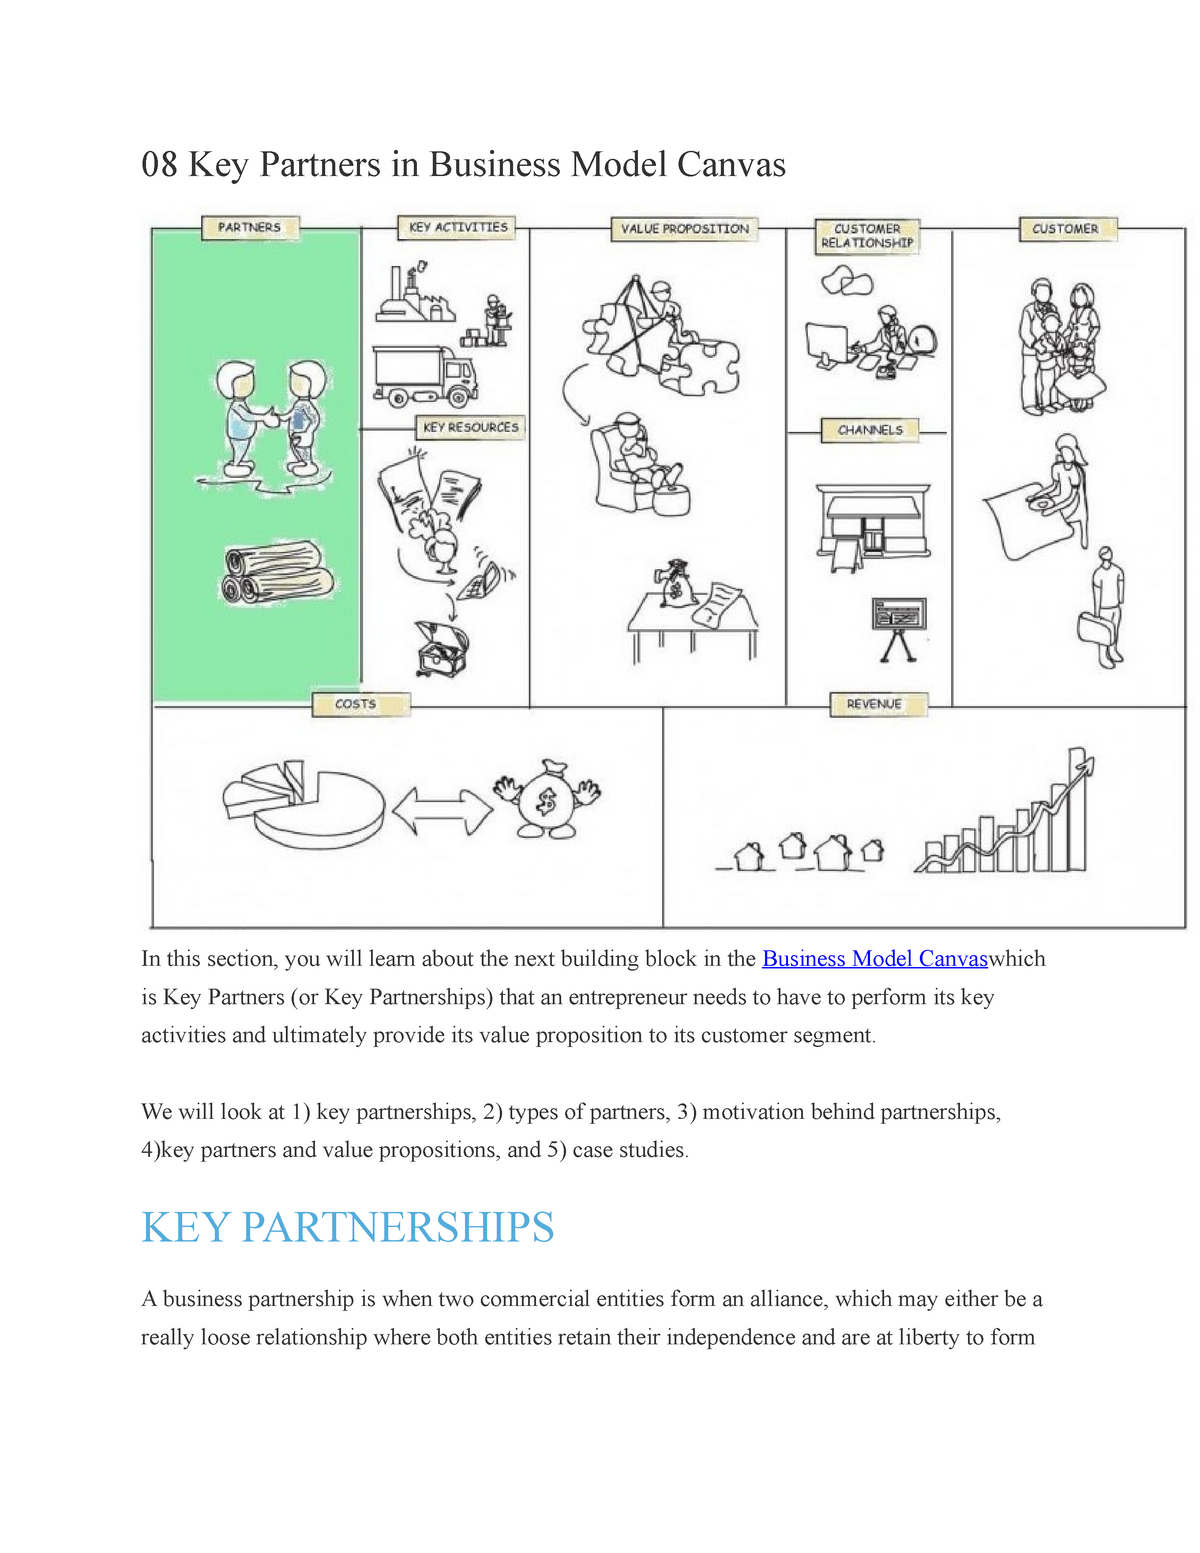 08 Key Partners in Business Model Canvas - We will look at 1) key partnerships, 2) types of - Studocu